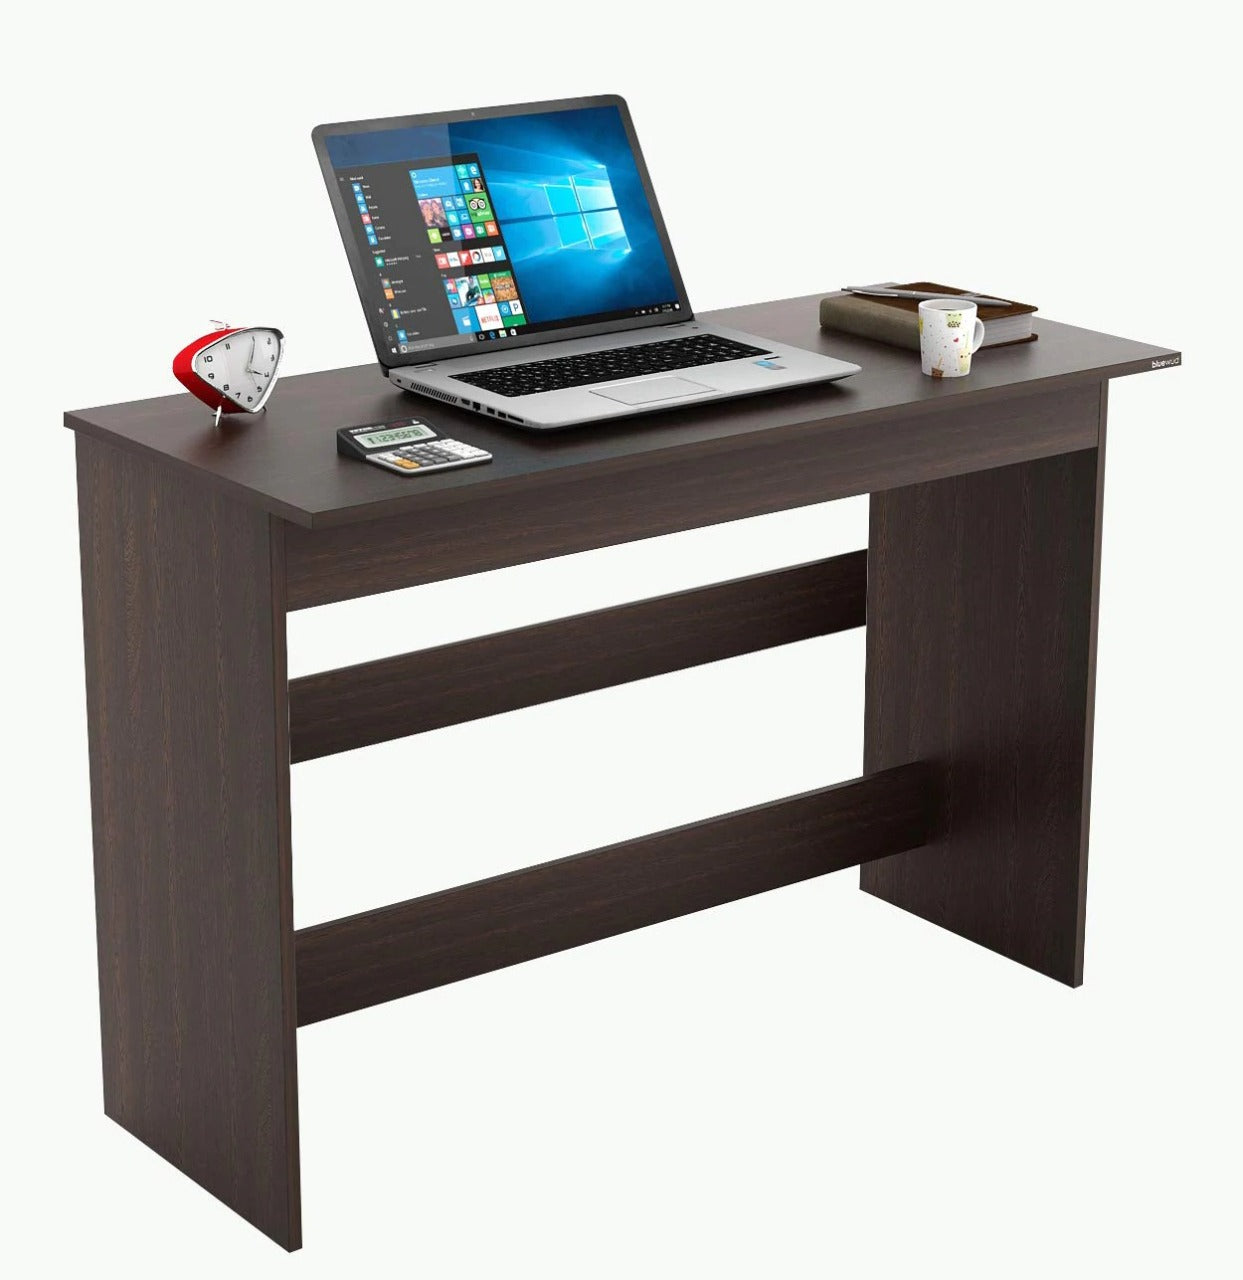 Latest Computer Table Design For Home And Office In 2022